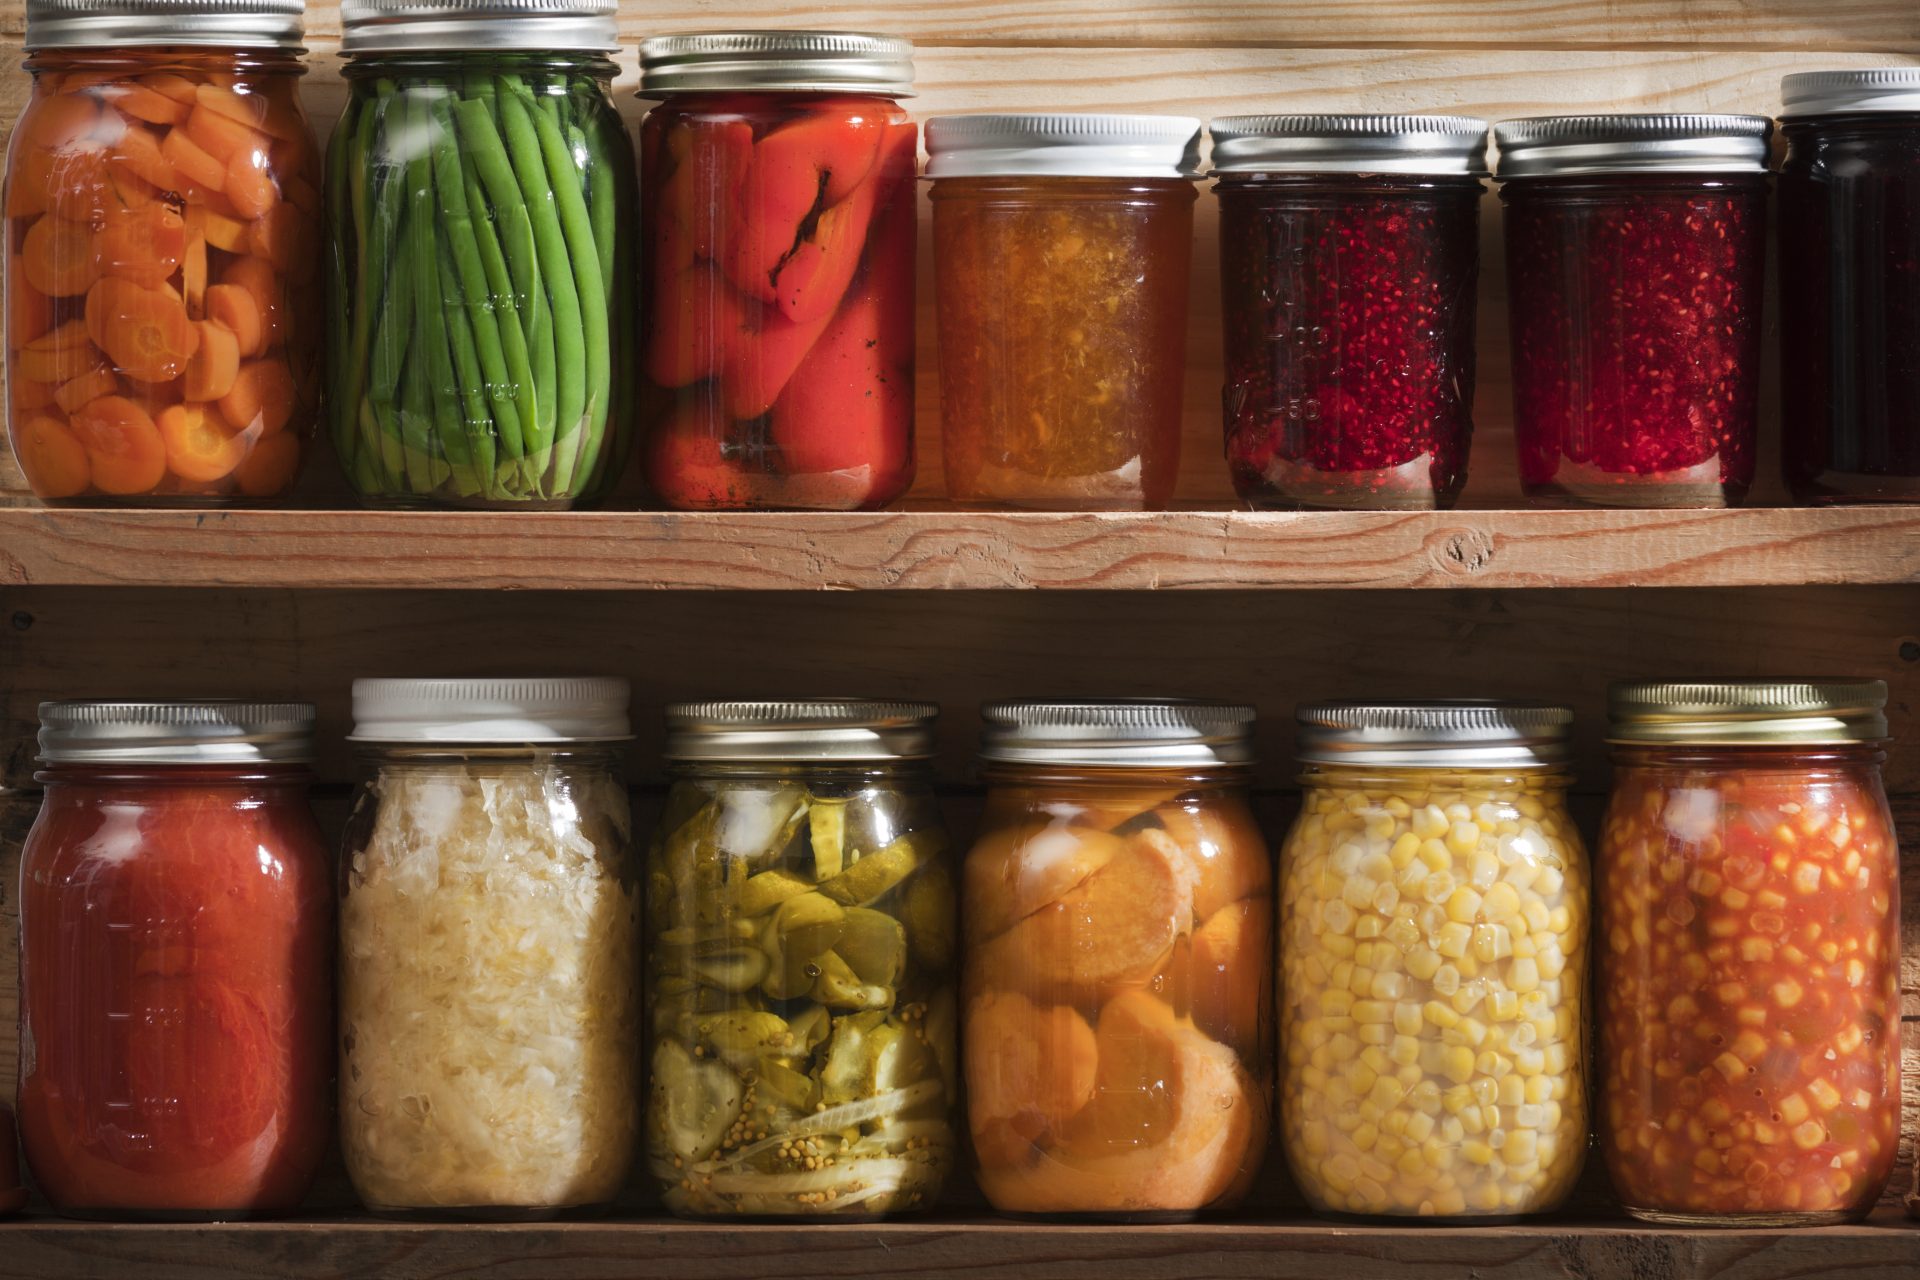 <p>Pretty much any whole food can be fermented in your home on the cheap. "What I like about fermented foods is that they democratize science. They don't really cost much, and you don't have to get them from some fancy store. You can do it yourself," John Cryan, a professor of anatomy and neuroscience at University College Cork, told BBC.</p>